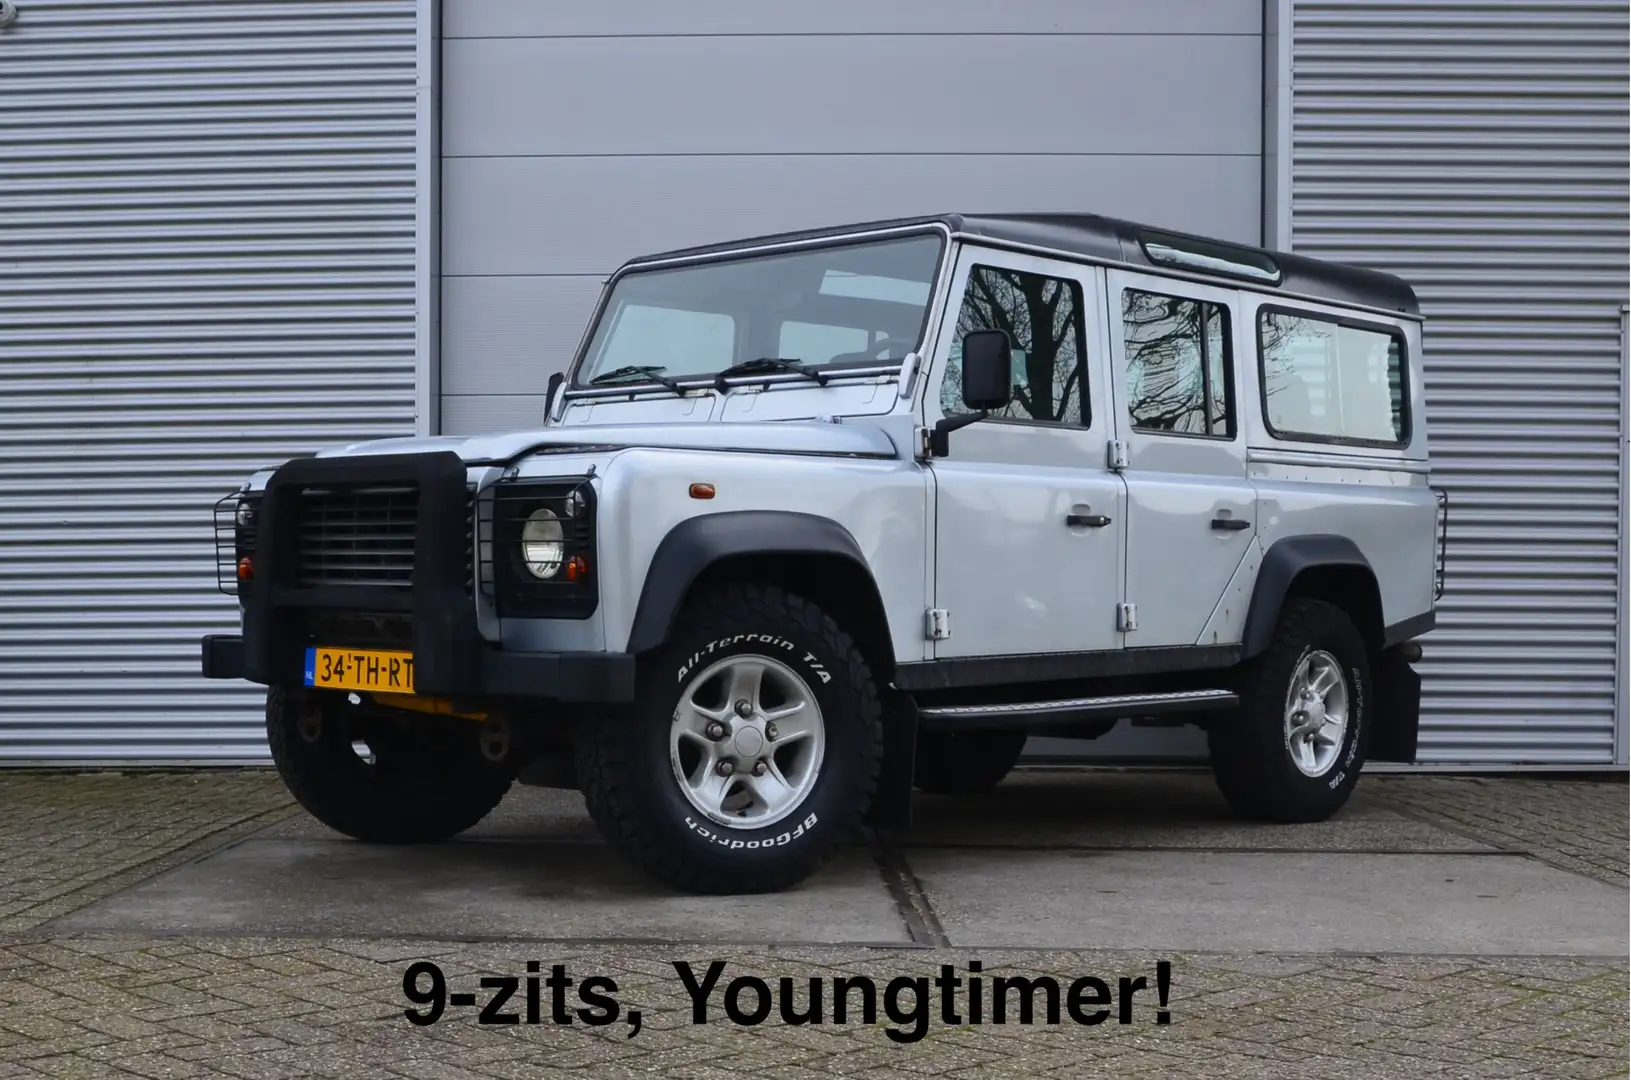 Land Rover Defender 2.5 TD5 110 SW XTech 9-zits, Youngtimer! fin. 542, Gri - 1